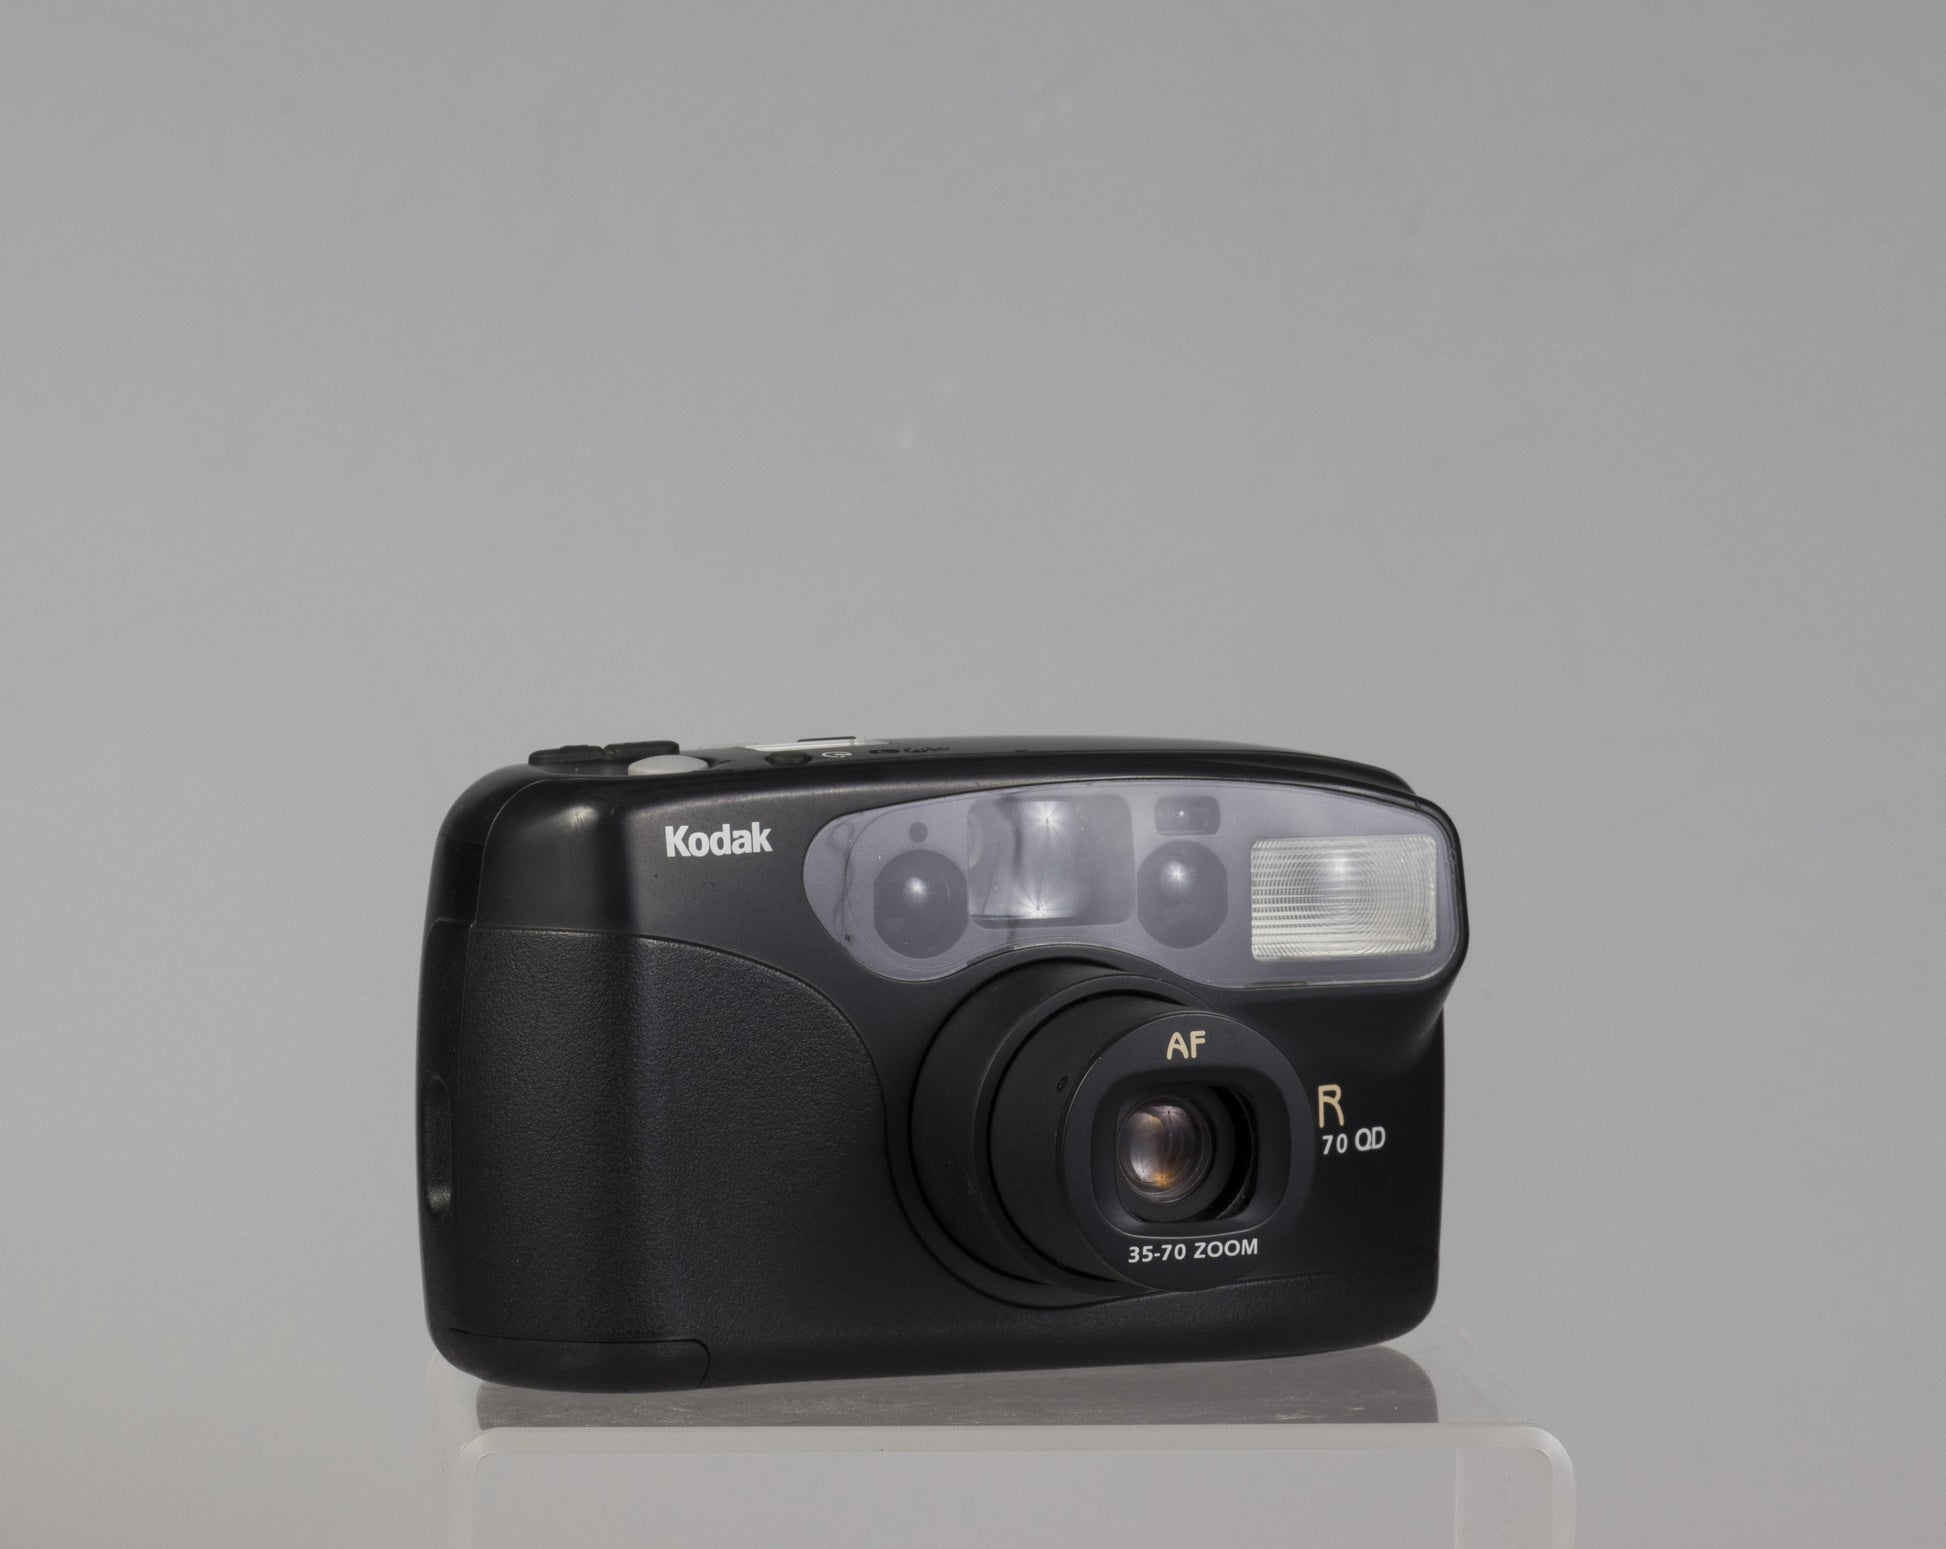 The Kodak Star Zoom 70 QD is a good quality 35mm point-and-shoot camera from the late 90s. We believe it was built by Chinon of Japan and is closely related to their Zoom 1000 camera.